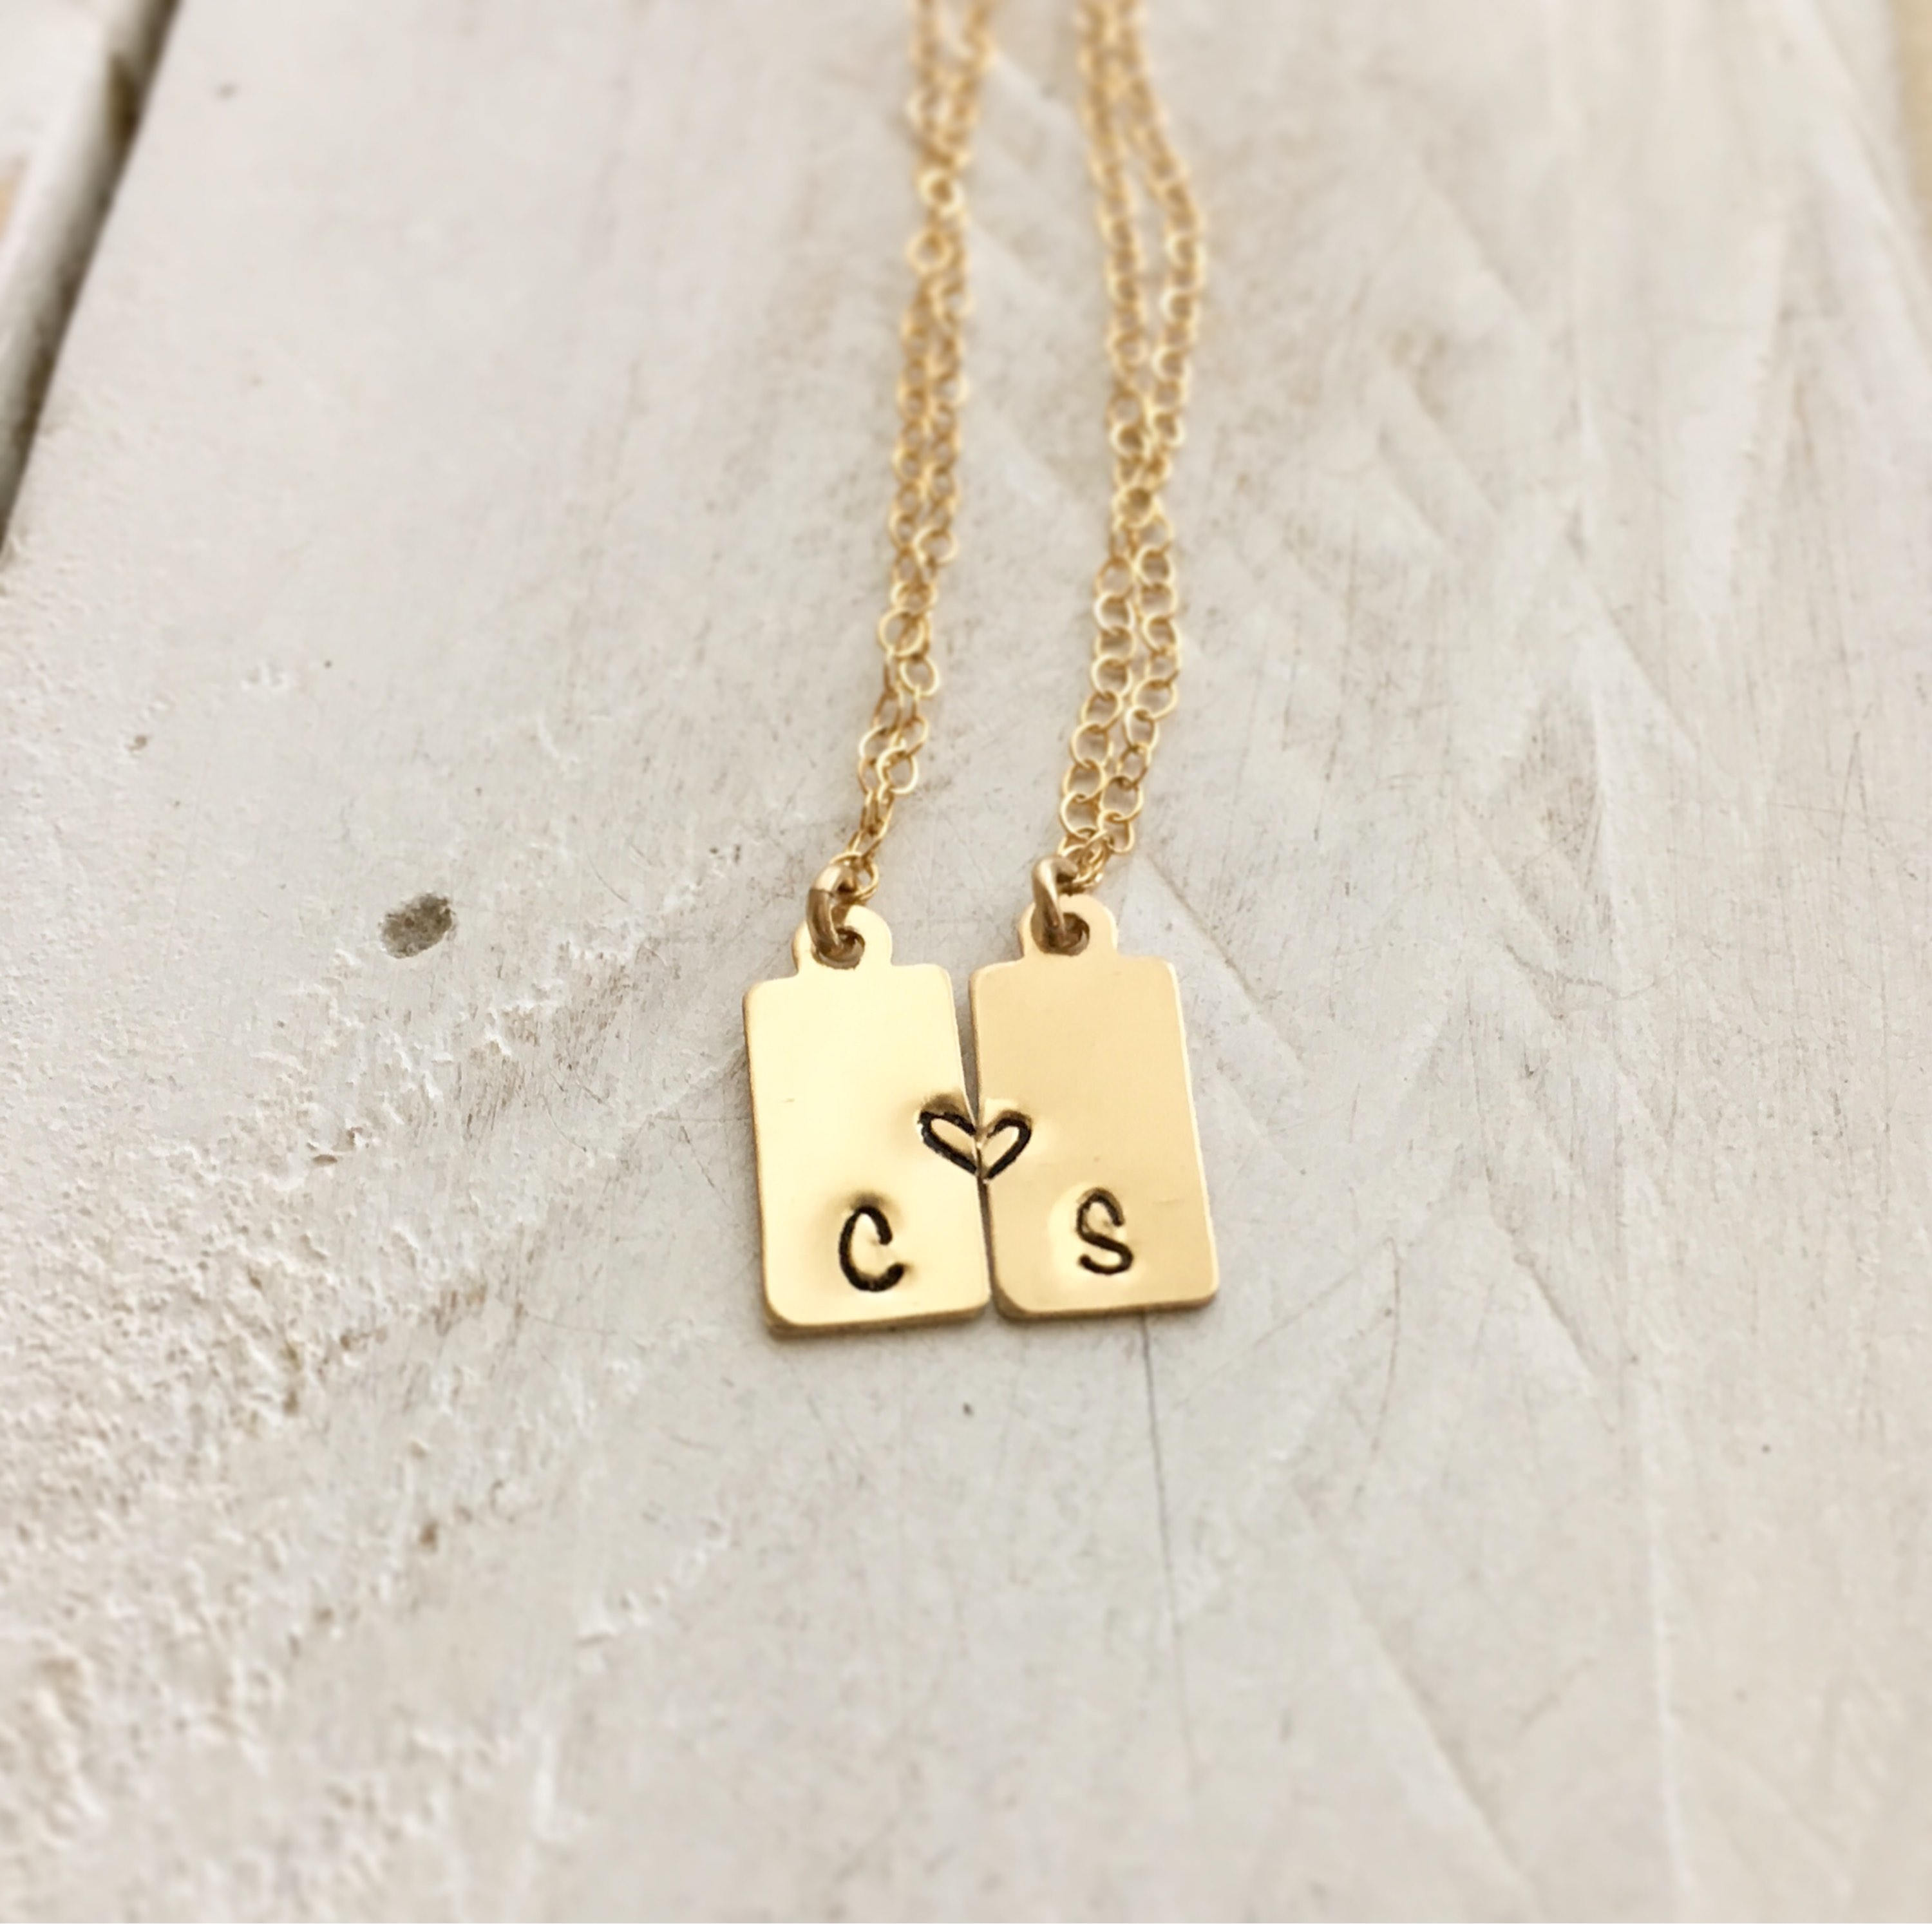 Best Friend Necklace For 2 , Matching Necklaces, Initial Necklace, Long ...